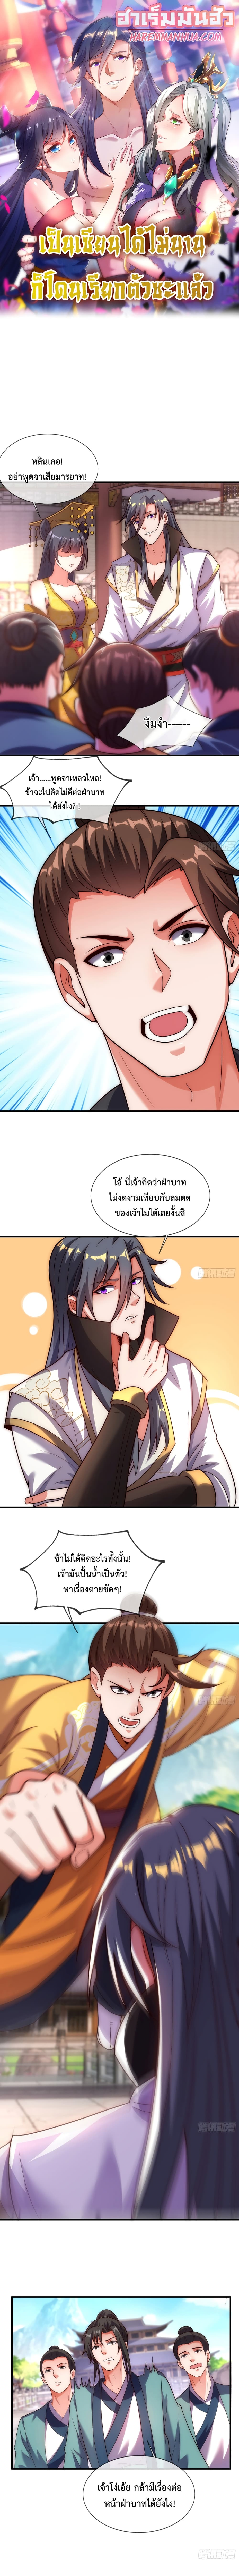 Become A Master Not Too Long But Got Summon Suddenly ตอนที่ 7 (1)